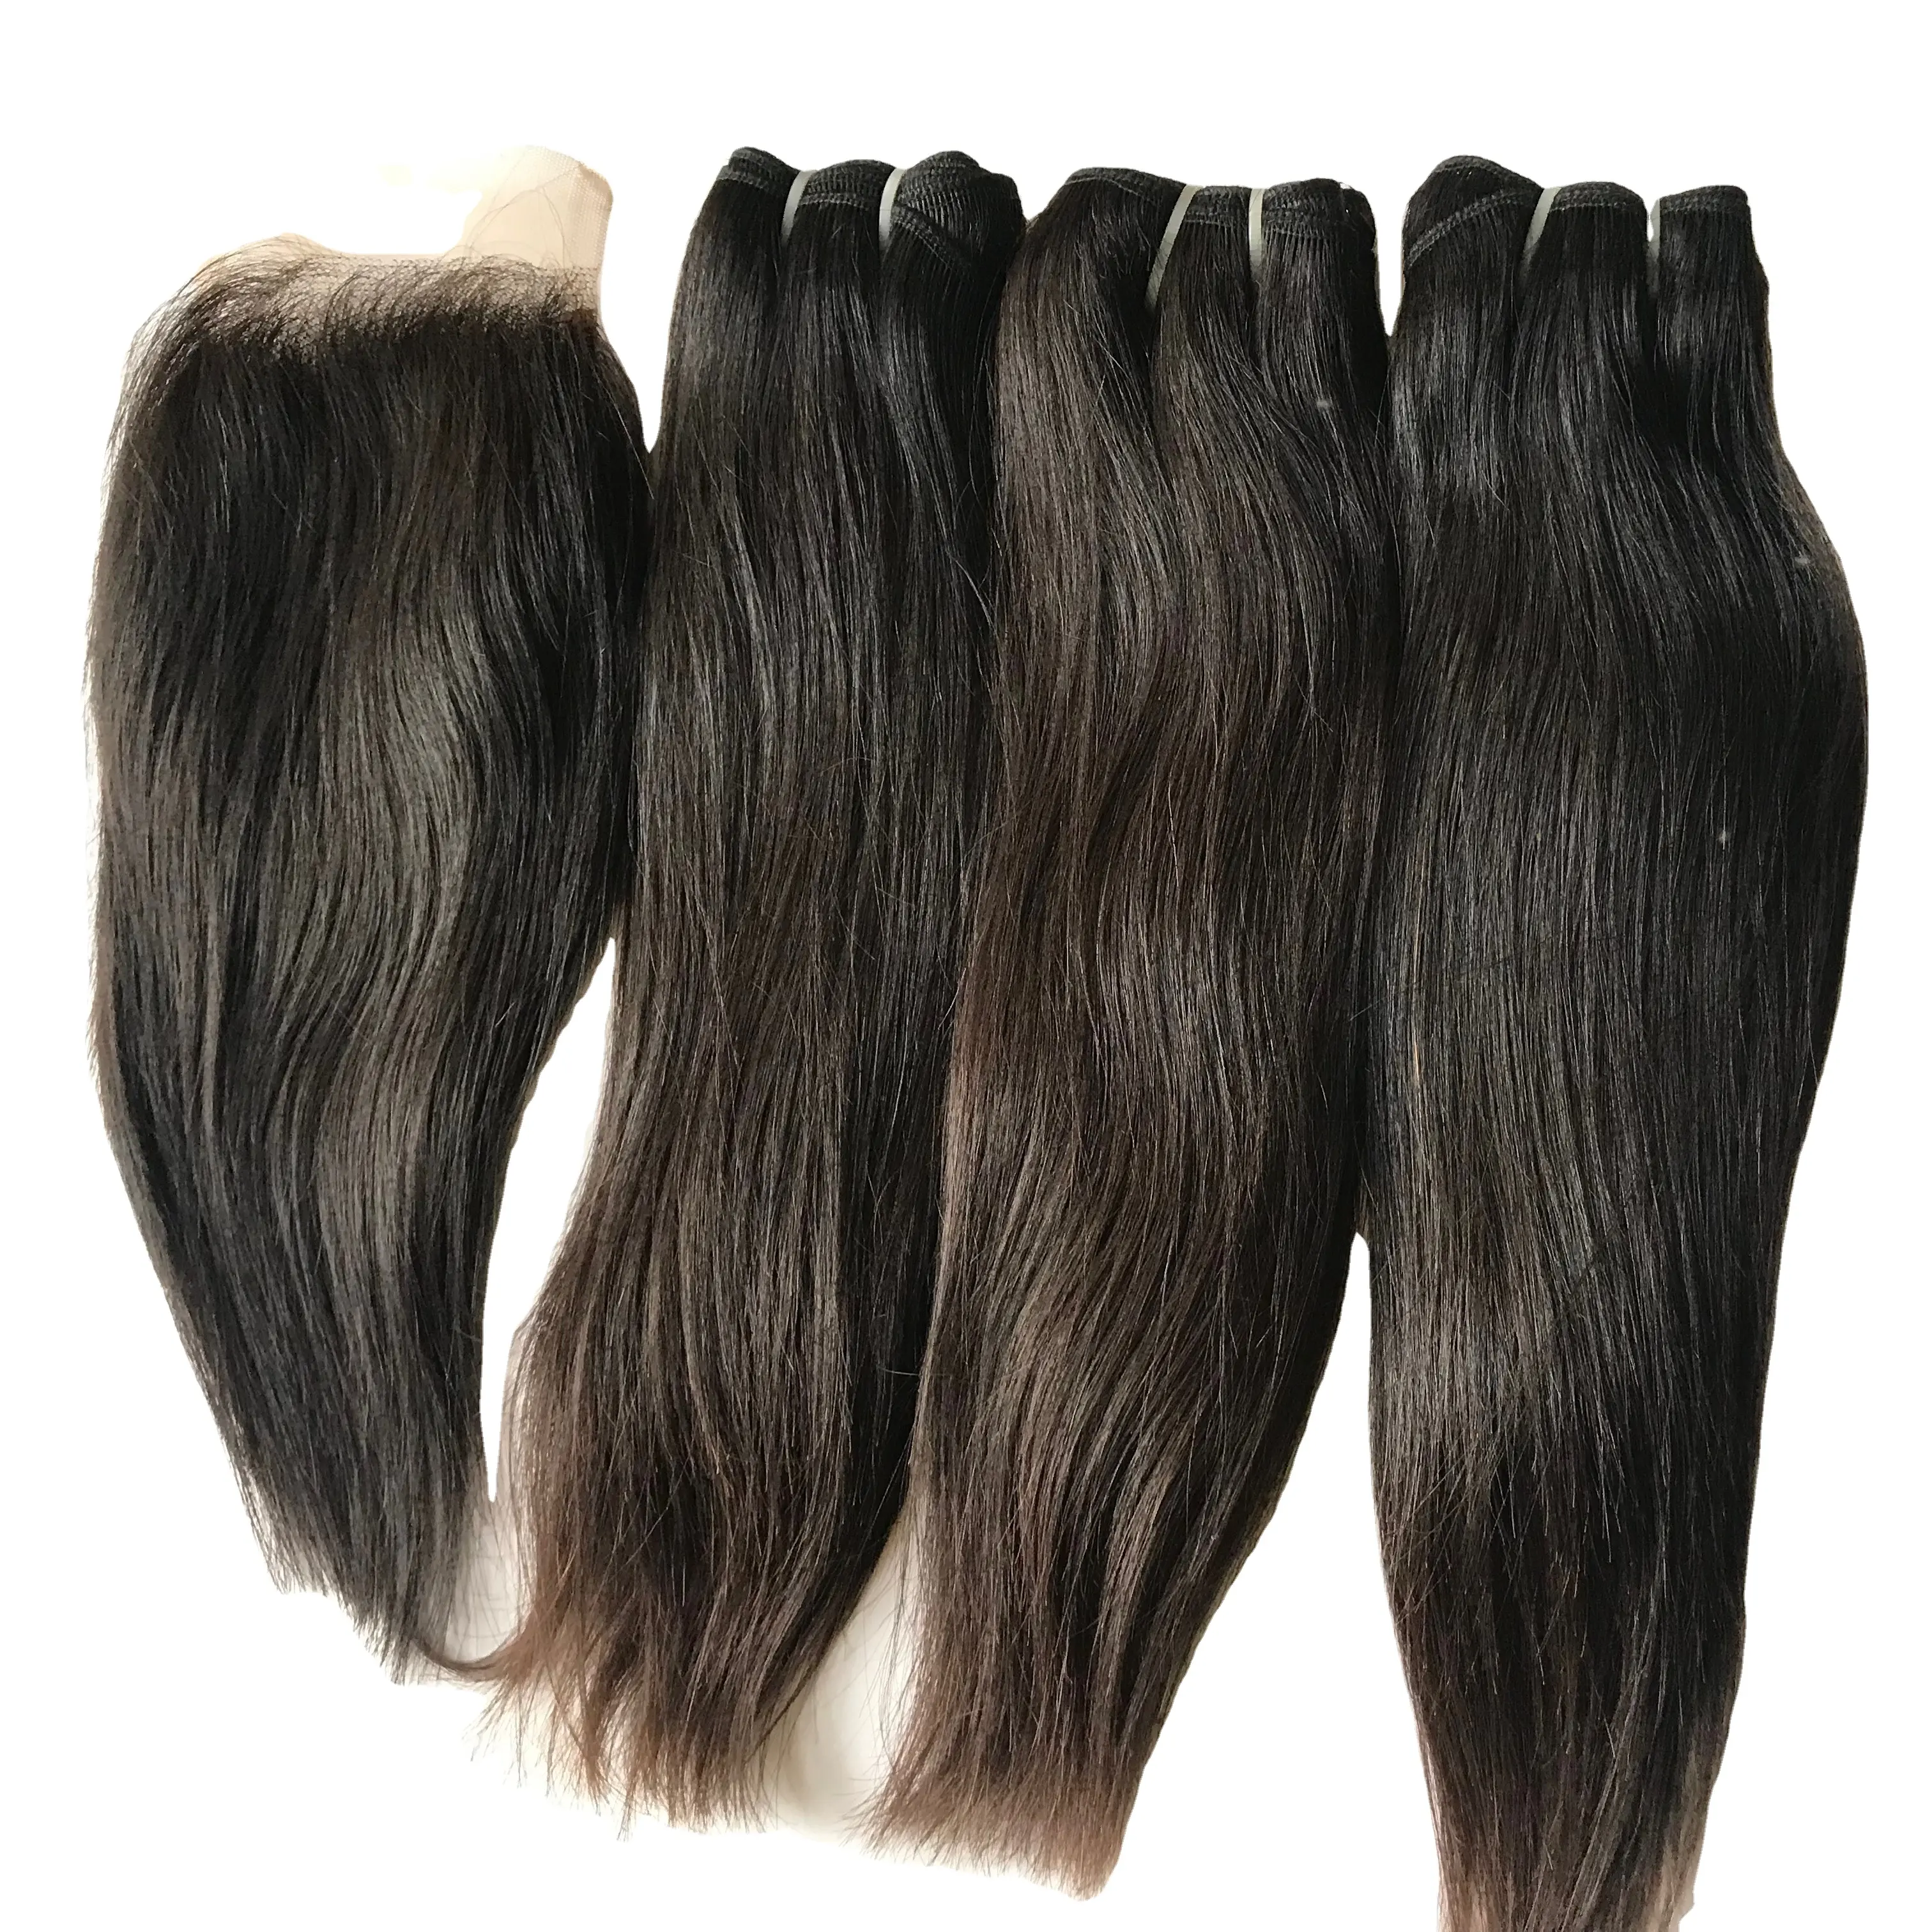 Leading Suppliers of Women cuticle aligned hair straight smooth raw remy virgin indian temple hair, raw human hair, Best hair